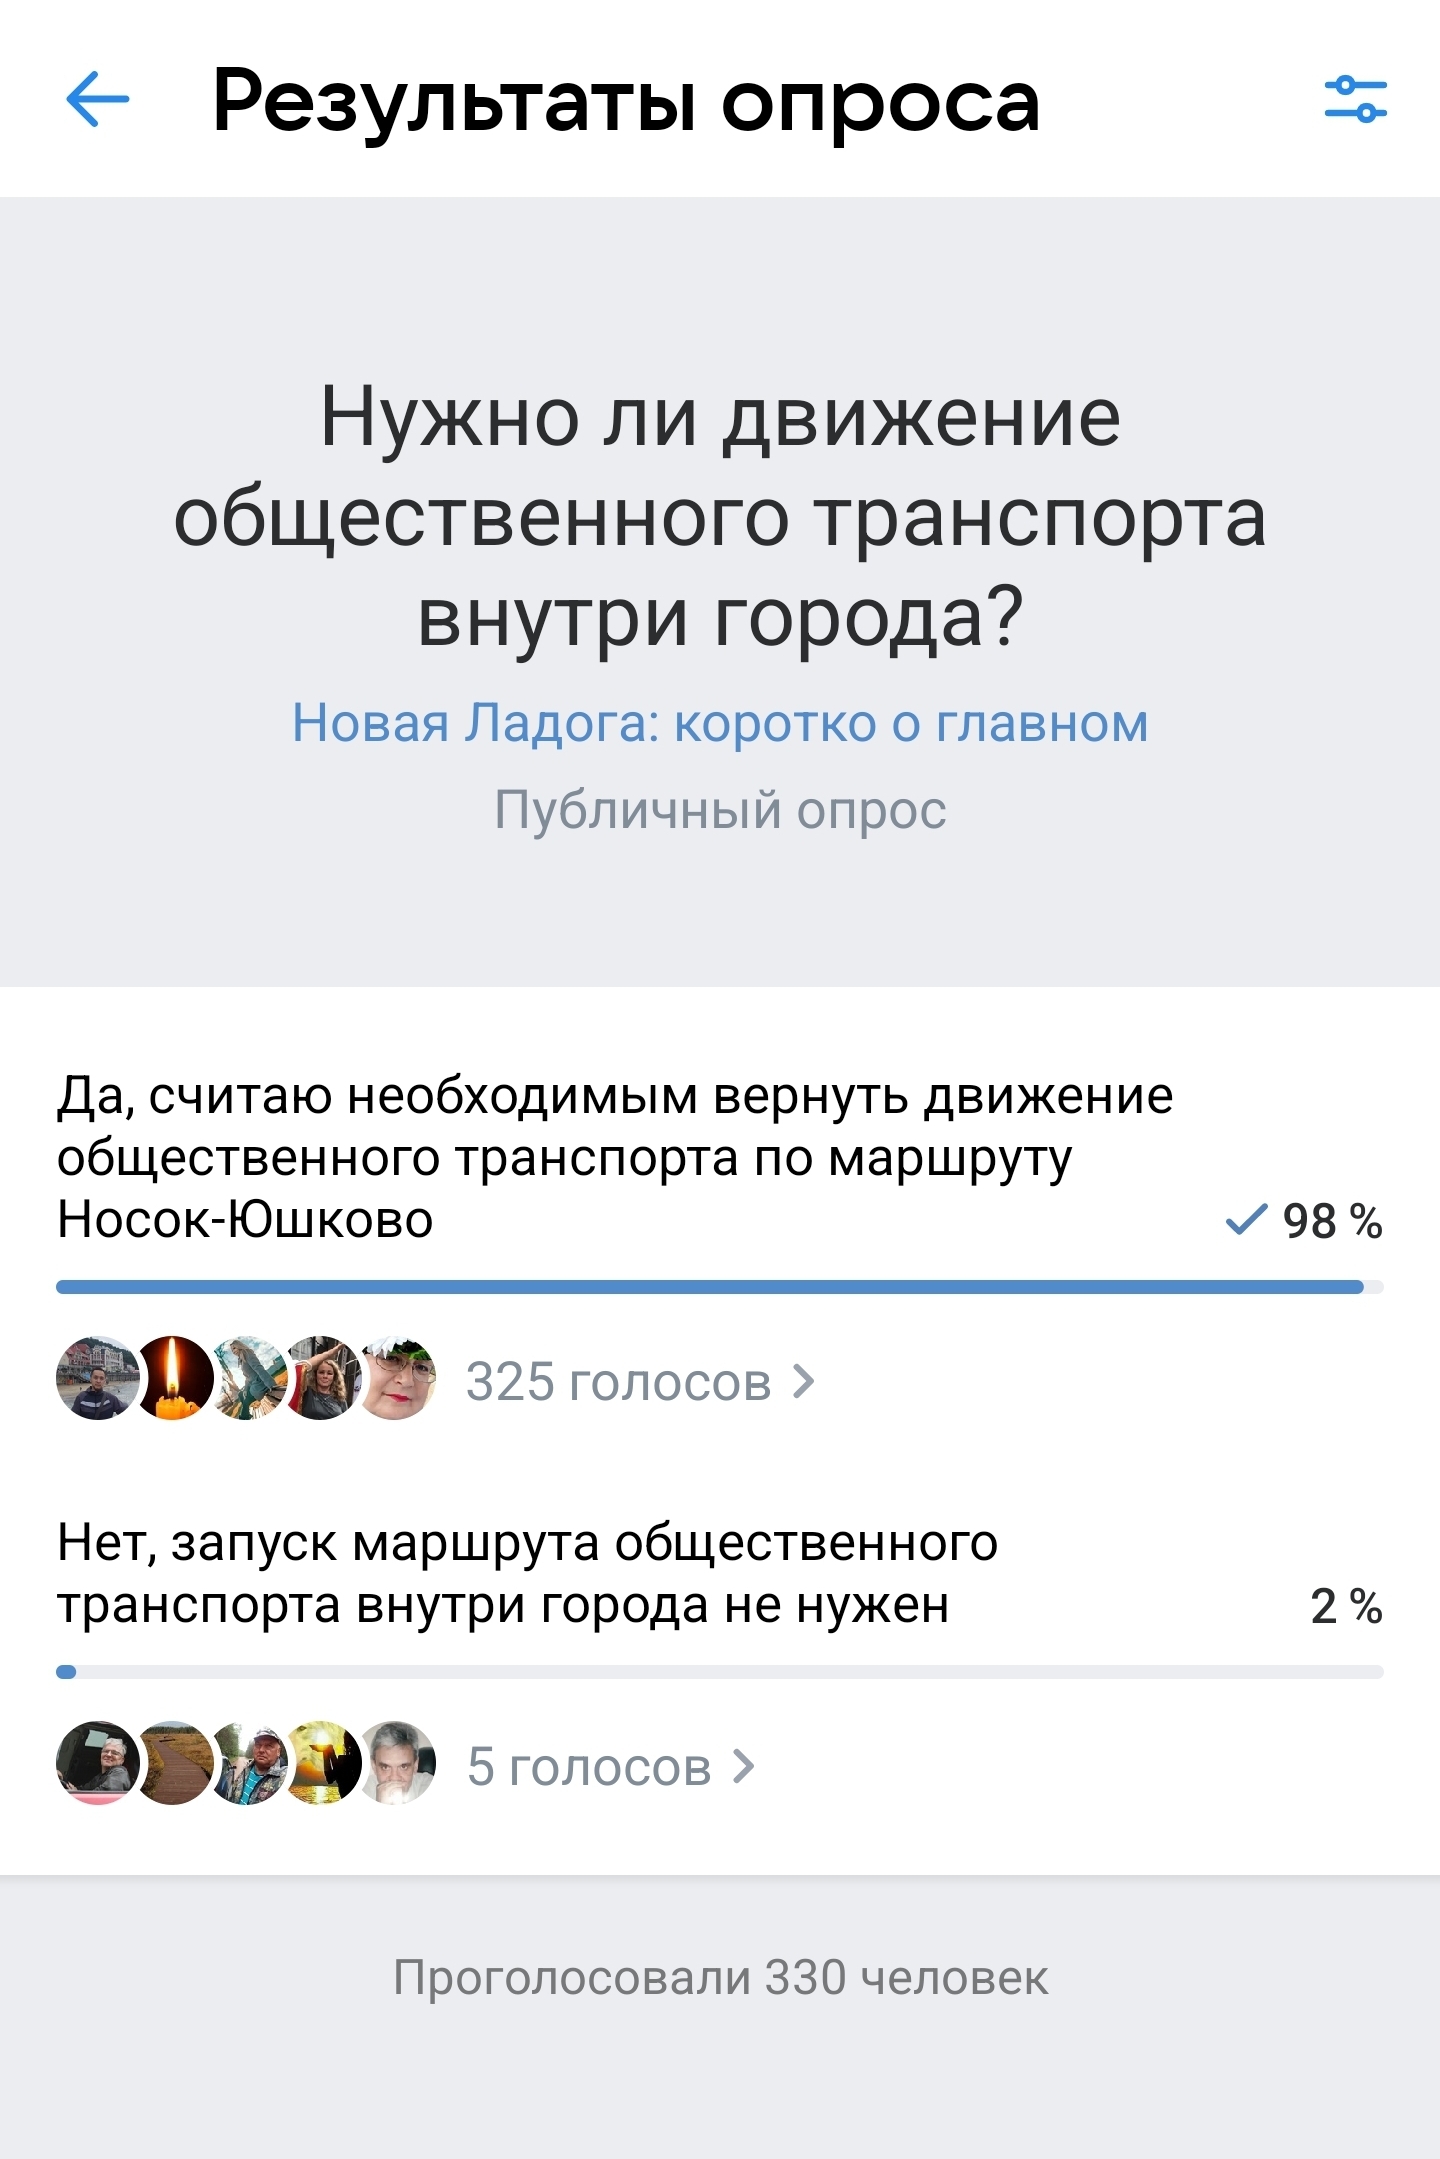 When the mayor doesn't really want to start public transport in the city - Survey, In contact with, Novaya Ladoga, Vote, Longpost